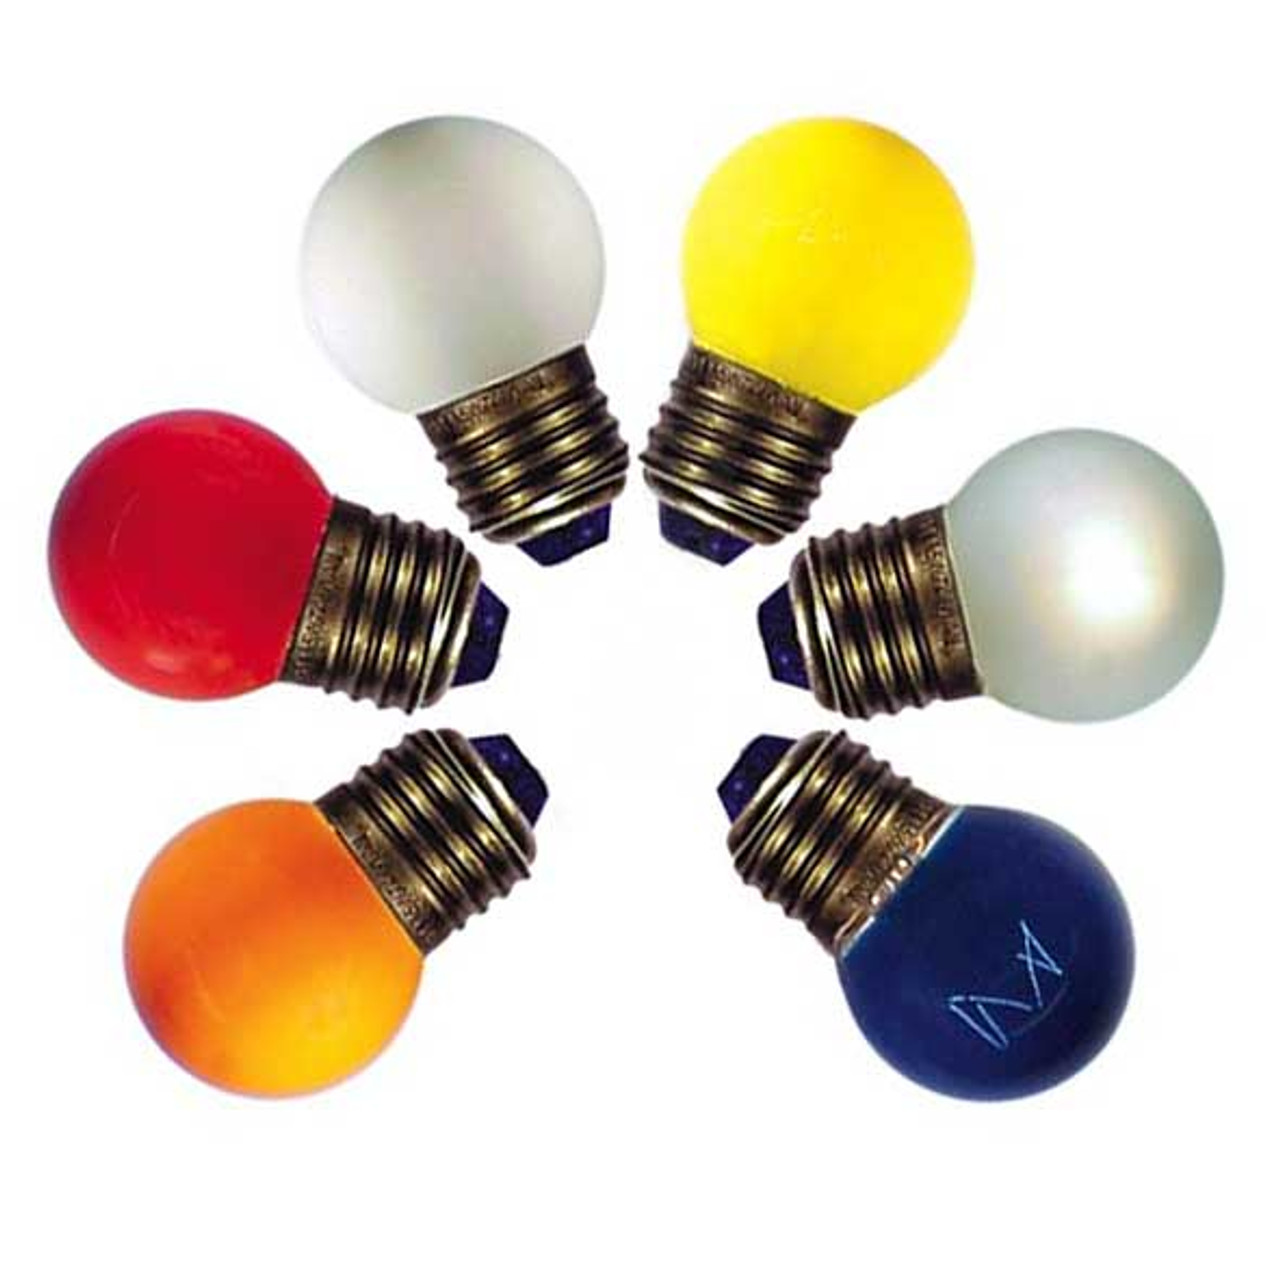 abstract Mam iets G12.5, E27 Ceramic Medium Base Color And Inside Frost Bulbs (203B7.5G12.5  CERAMIC) - Action Lighting™, Inc.